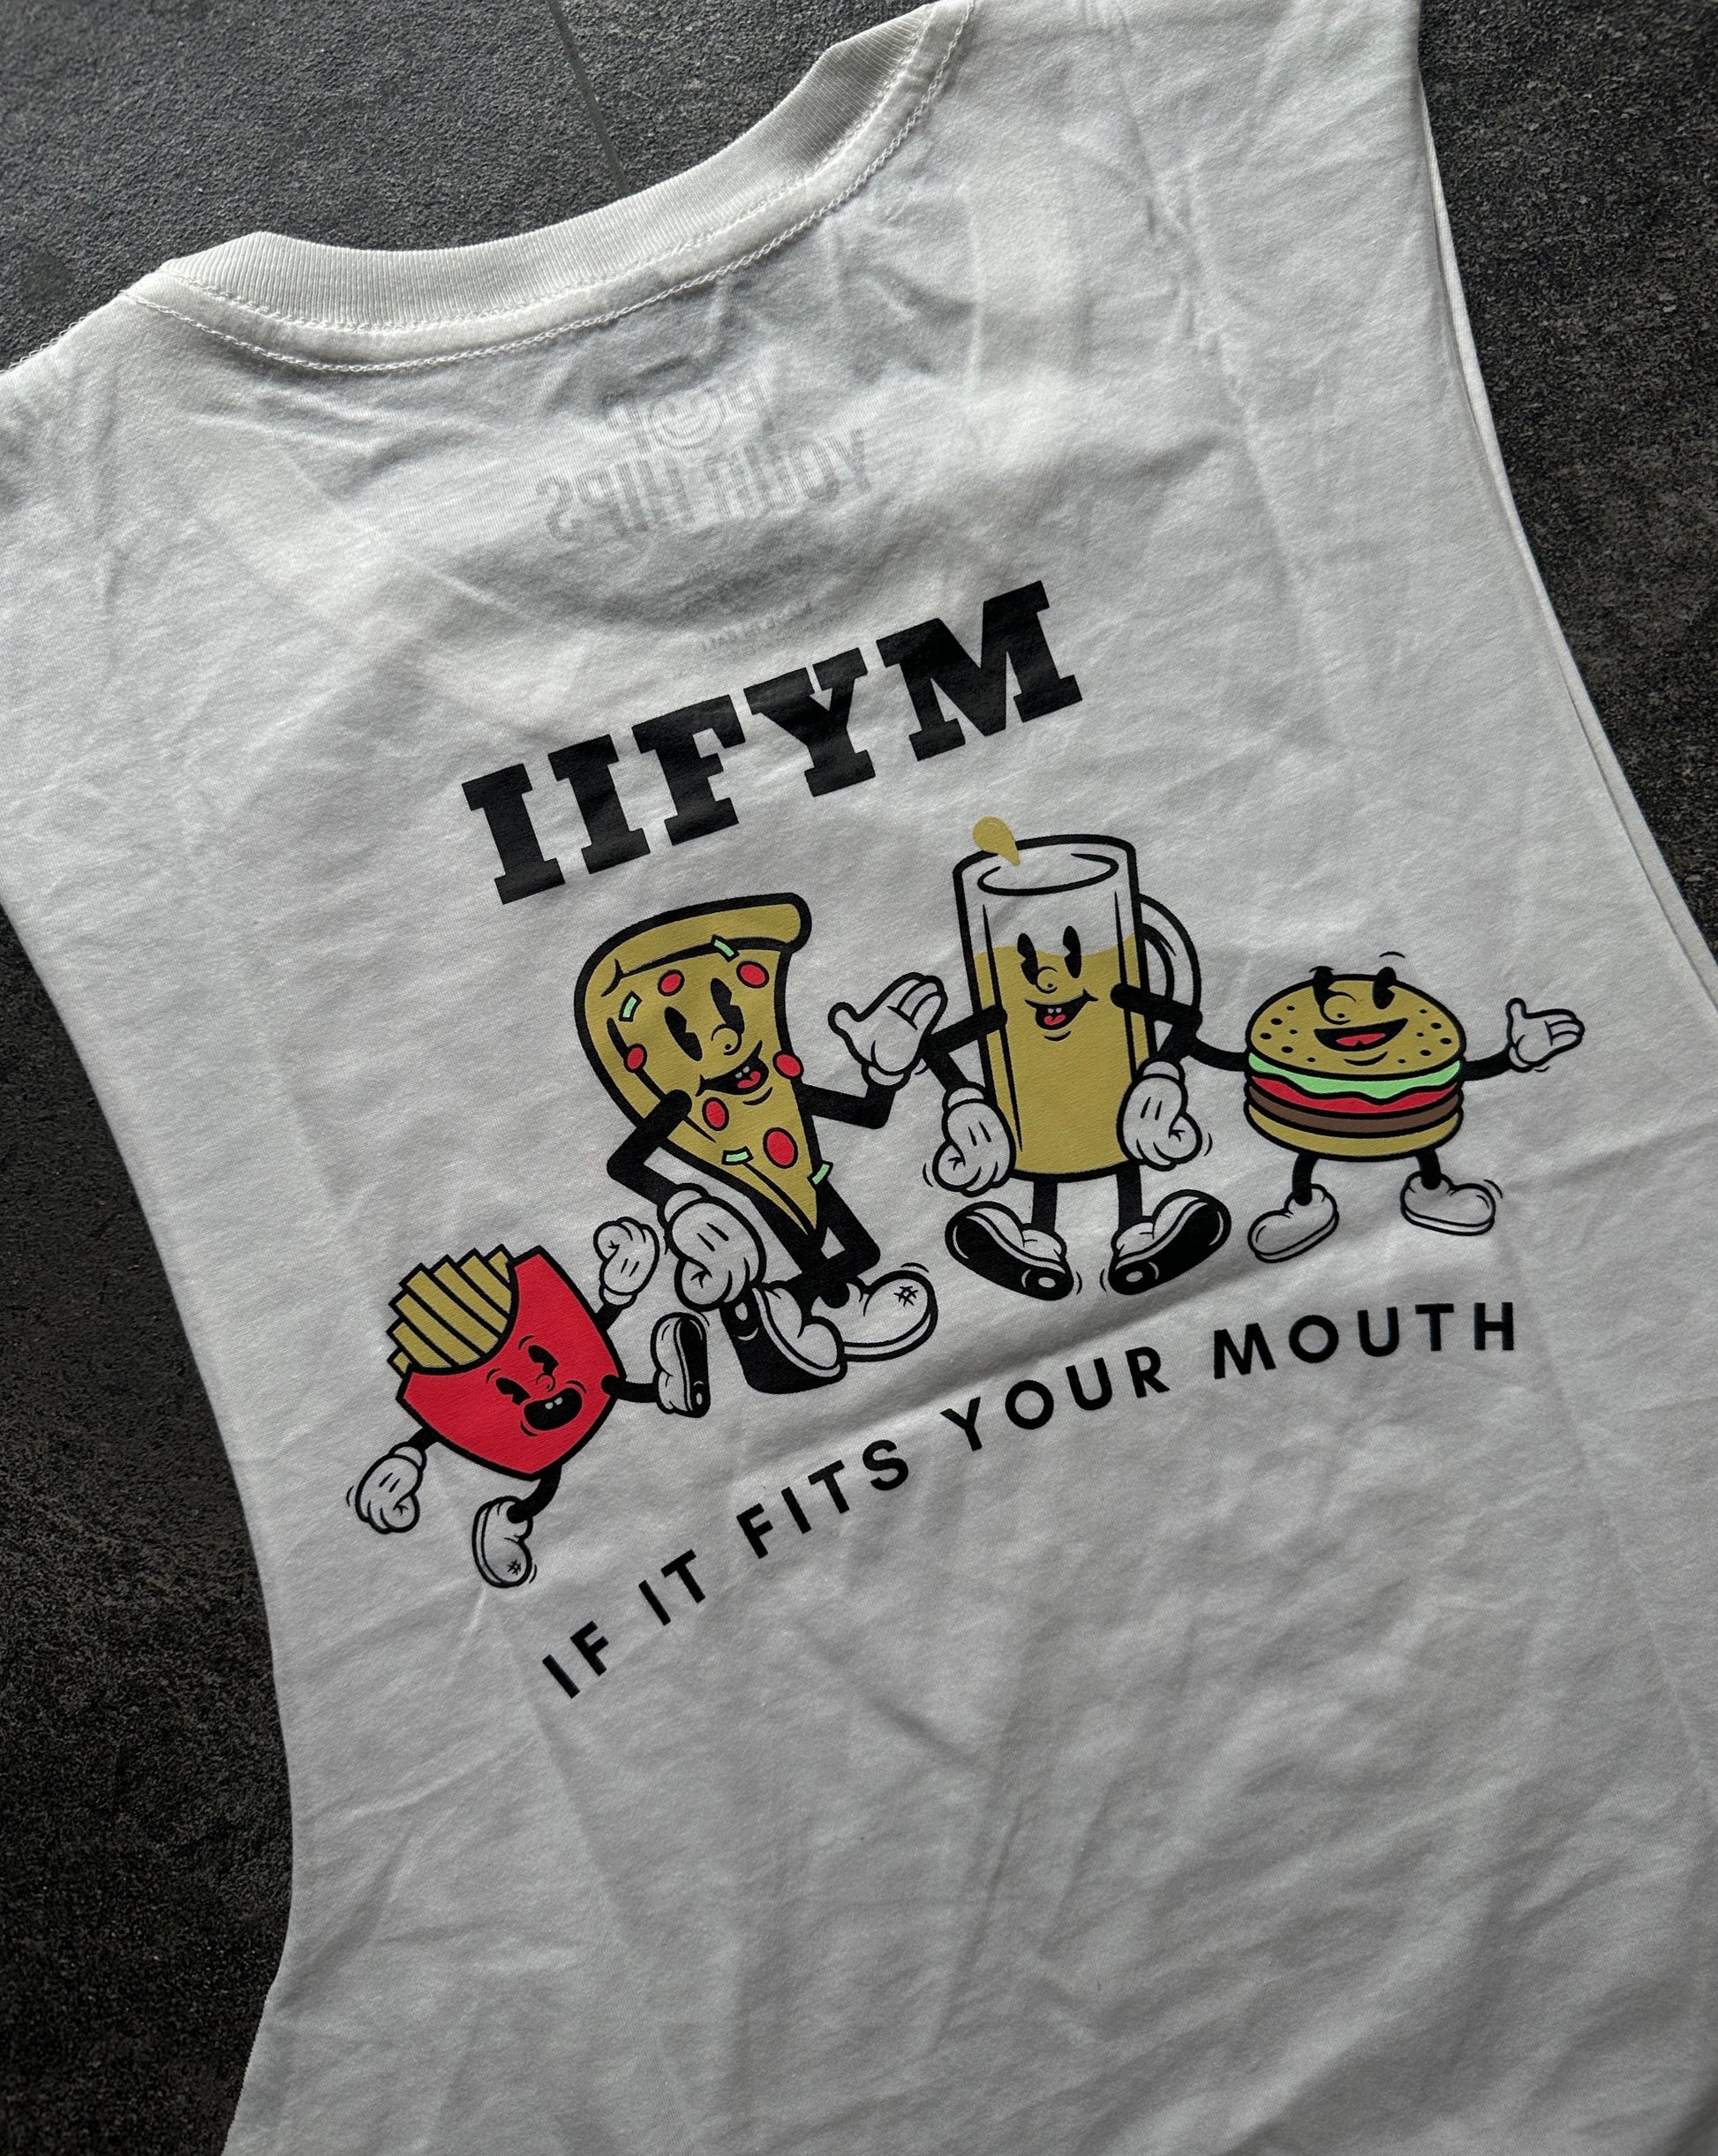 IIFYM (If it fits your mouth) muscle tank 